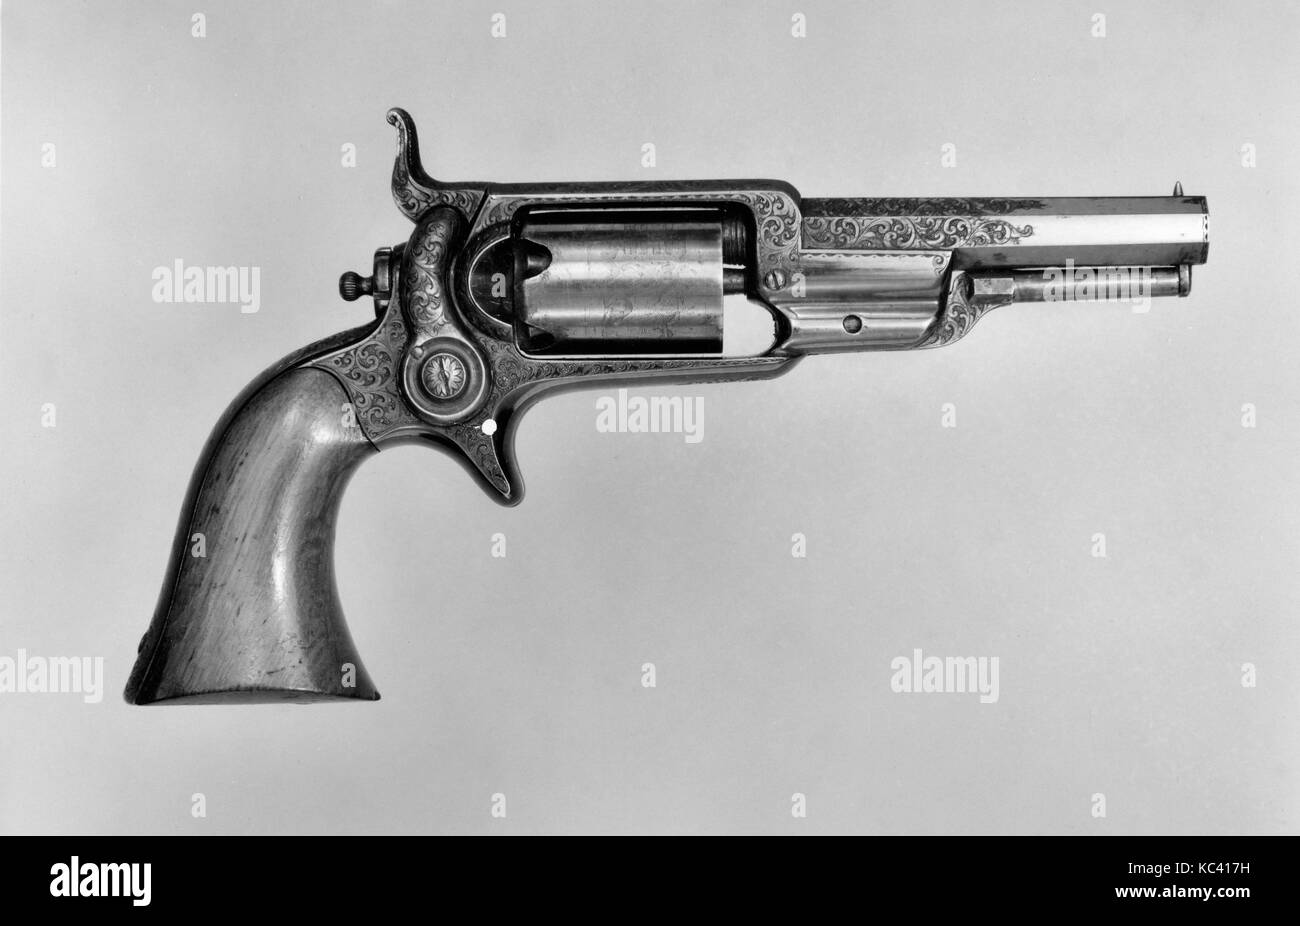 Colt Model 1855 Pocket Percussion Revolver, Serial no. 4460, with Case and Accessories, 1855 Stock Photo